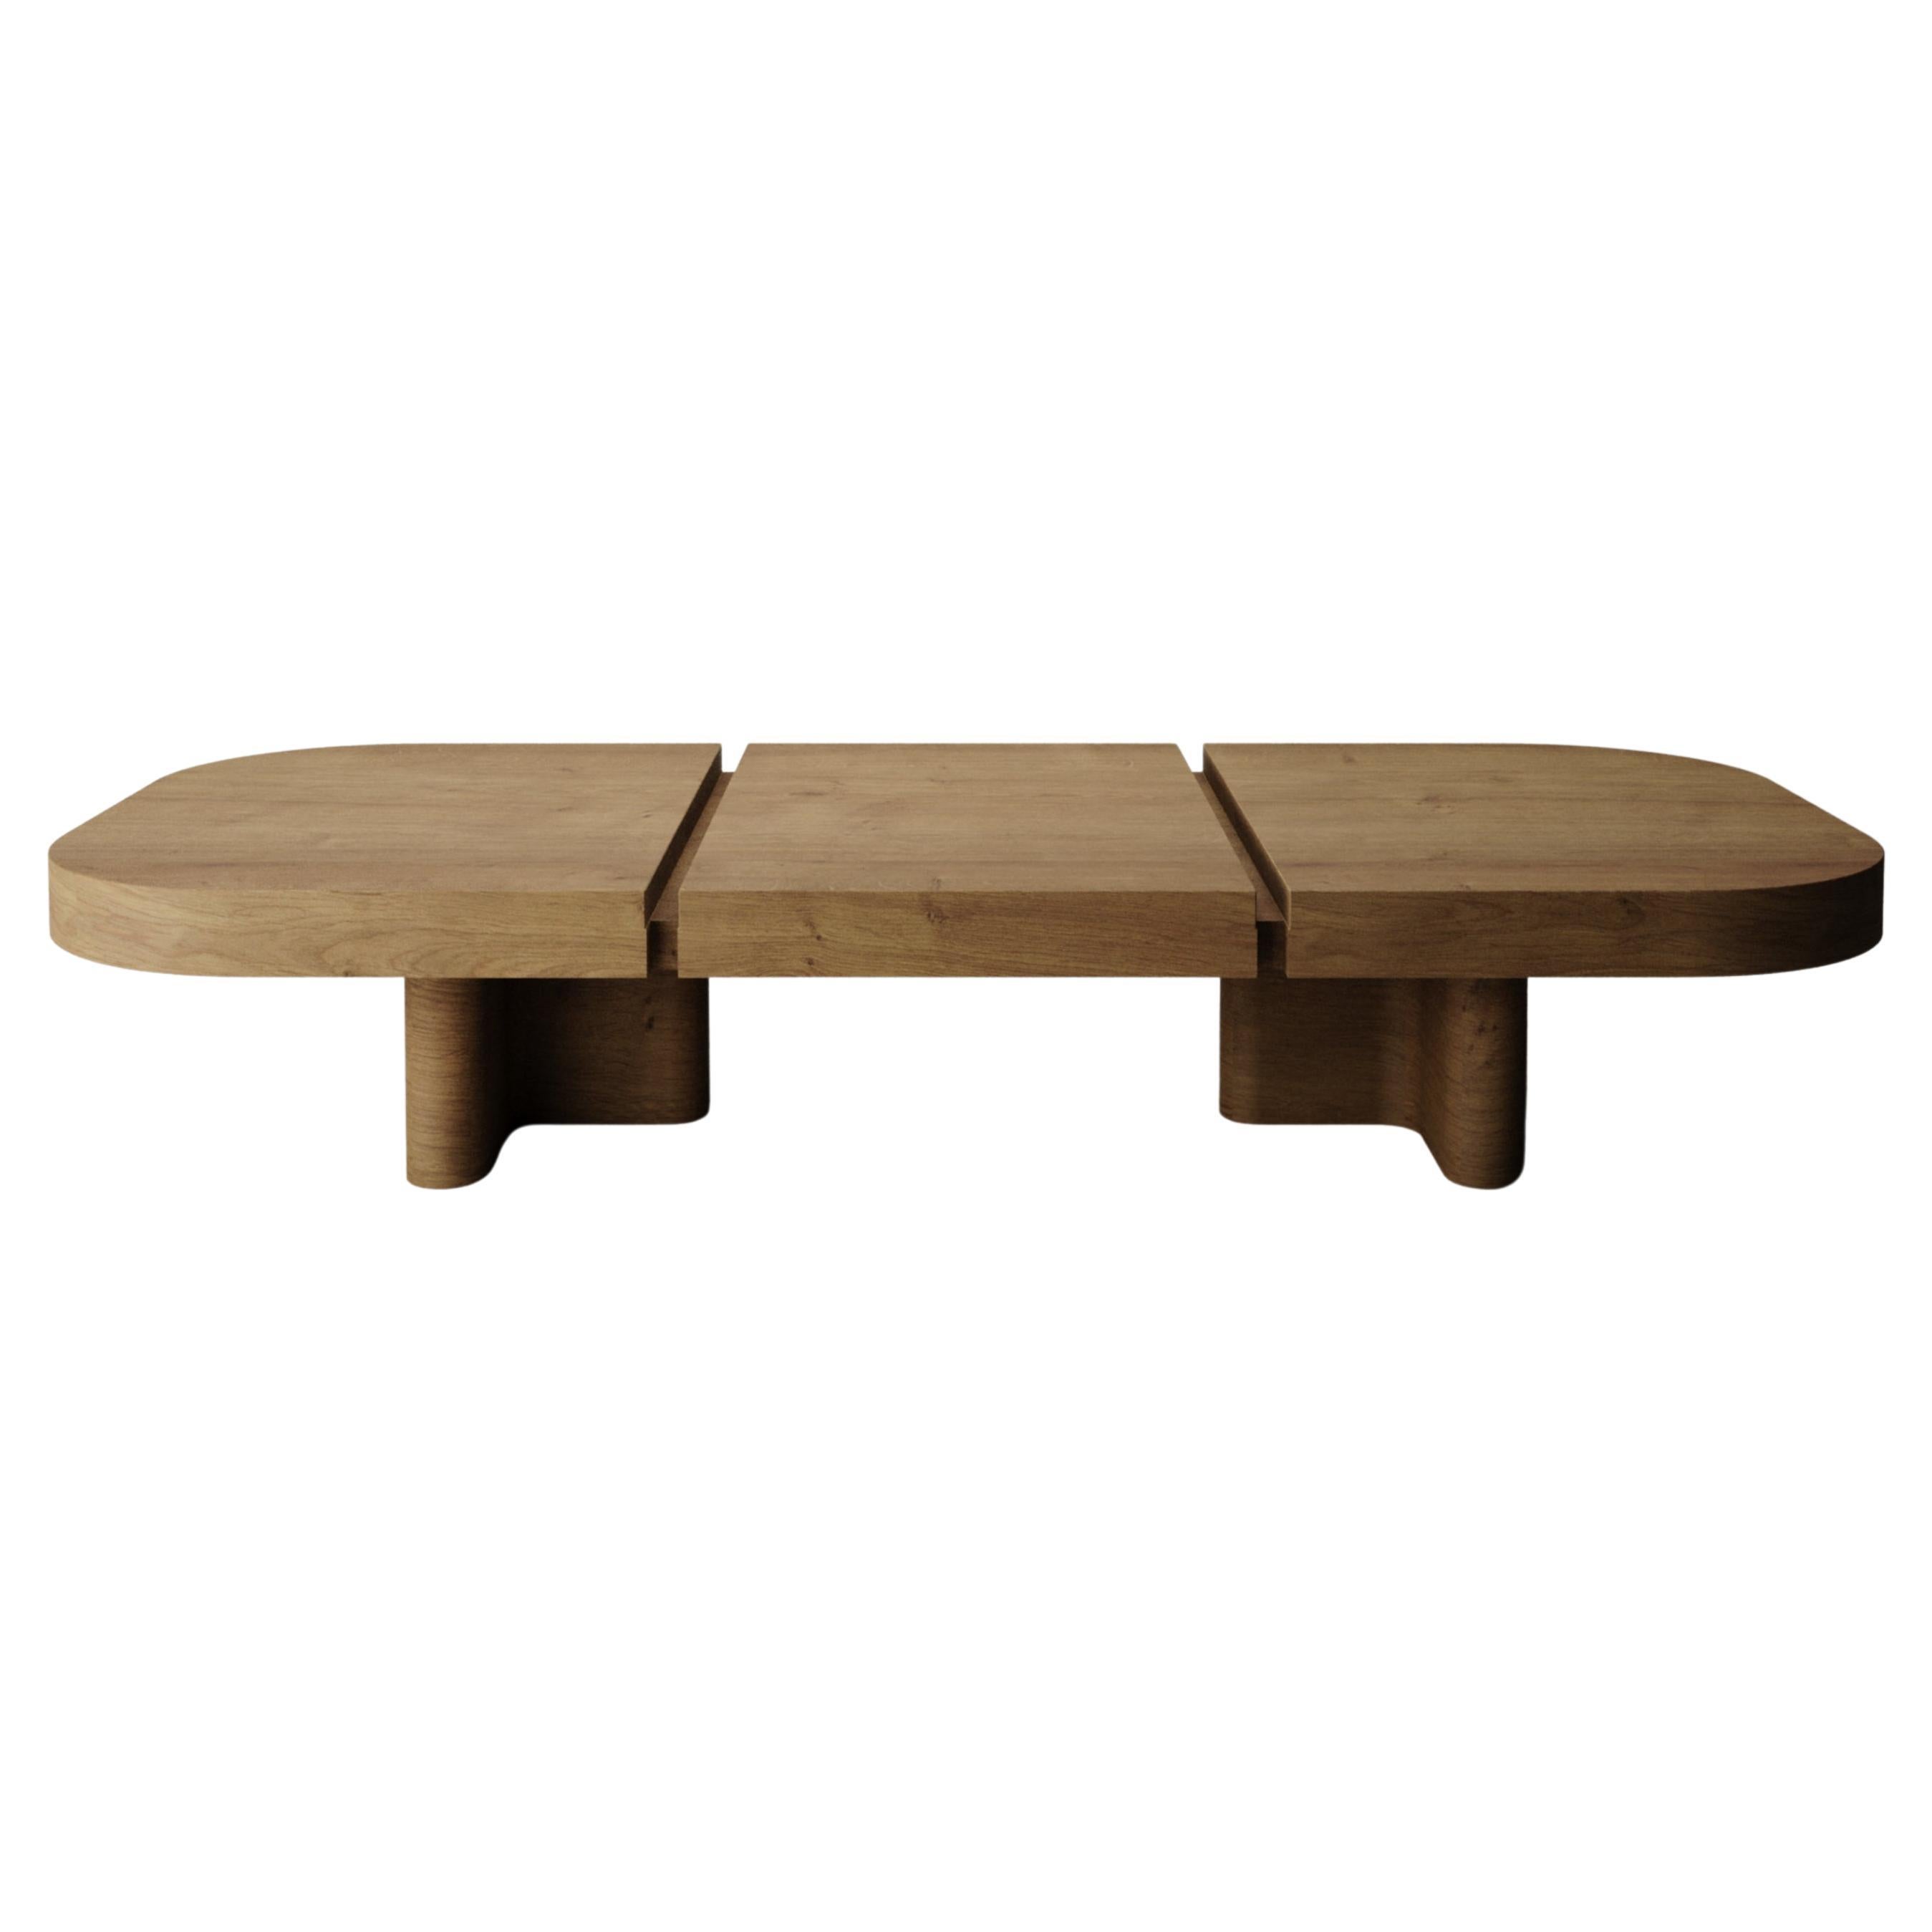 Collector -Designed by Studio Rig Meco Center Table Smoke Oak im Angebot